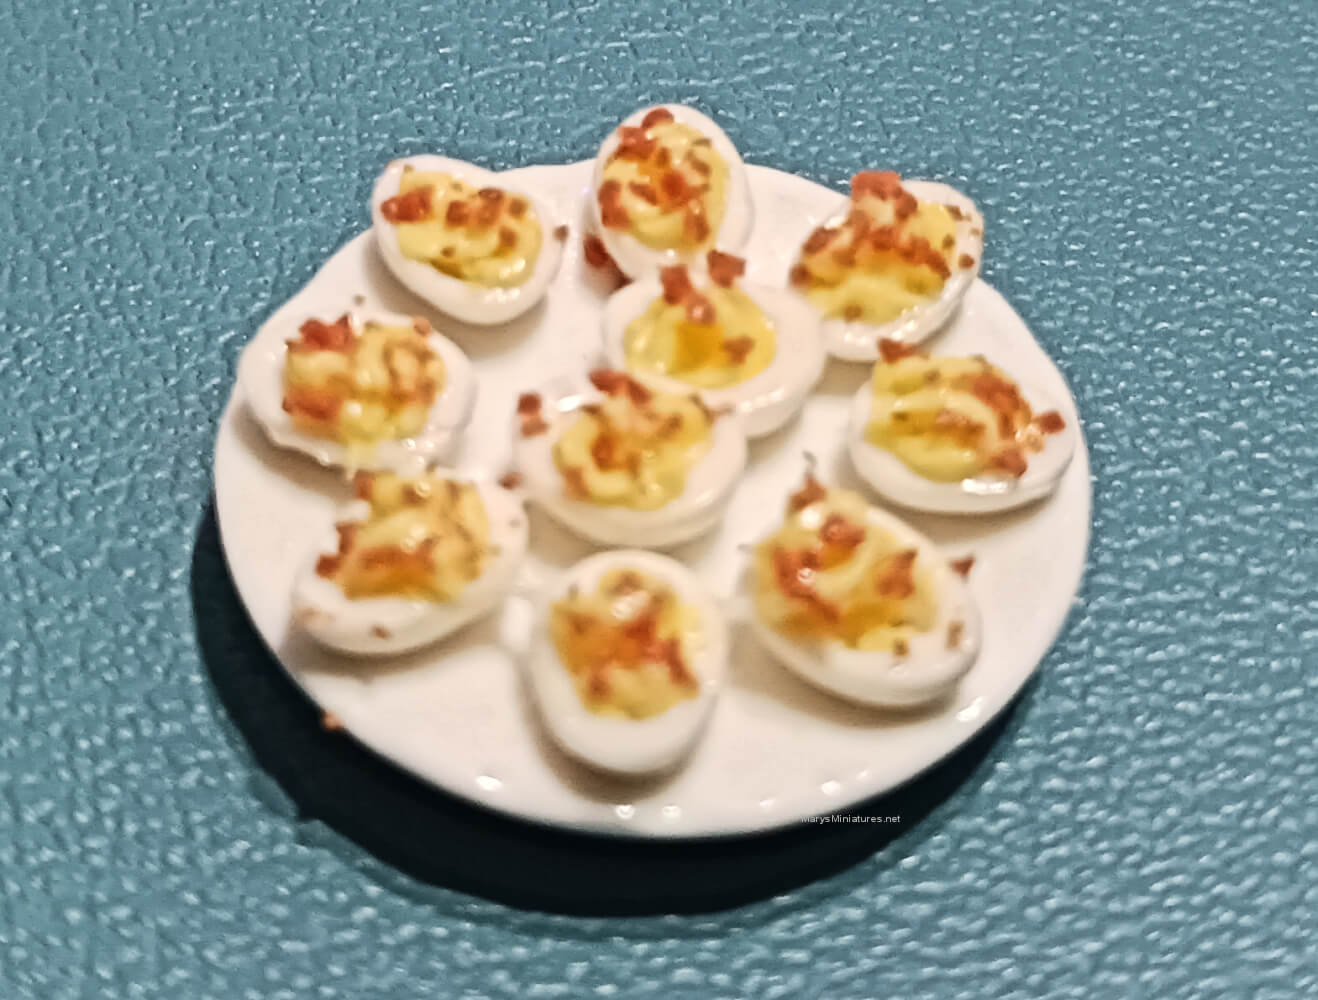 Deviled Eggs on Plate